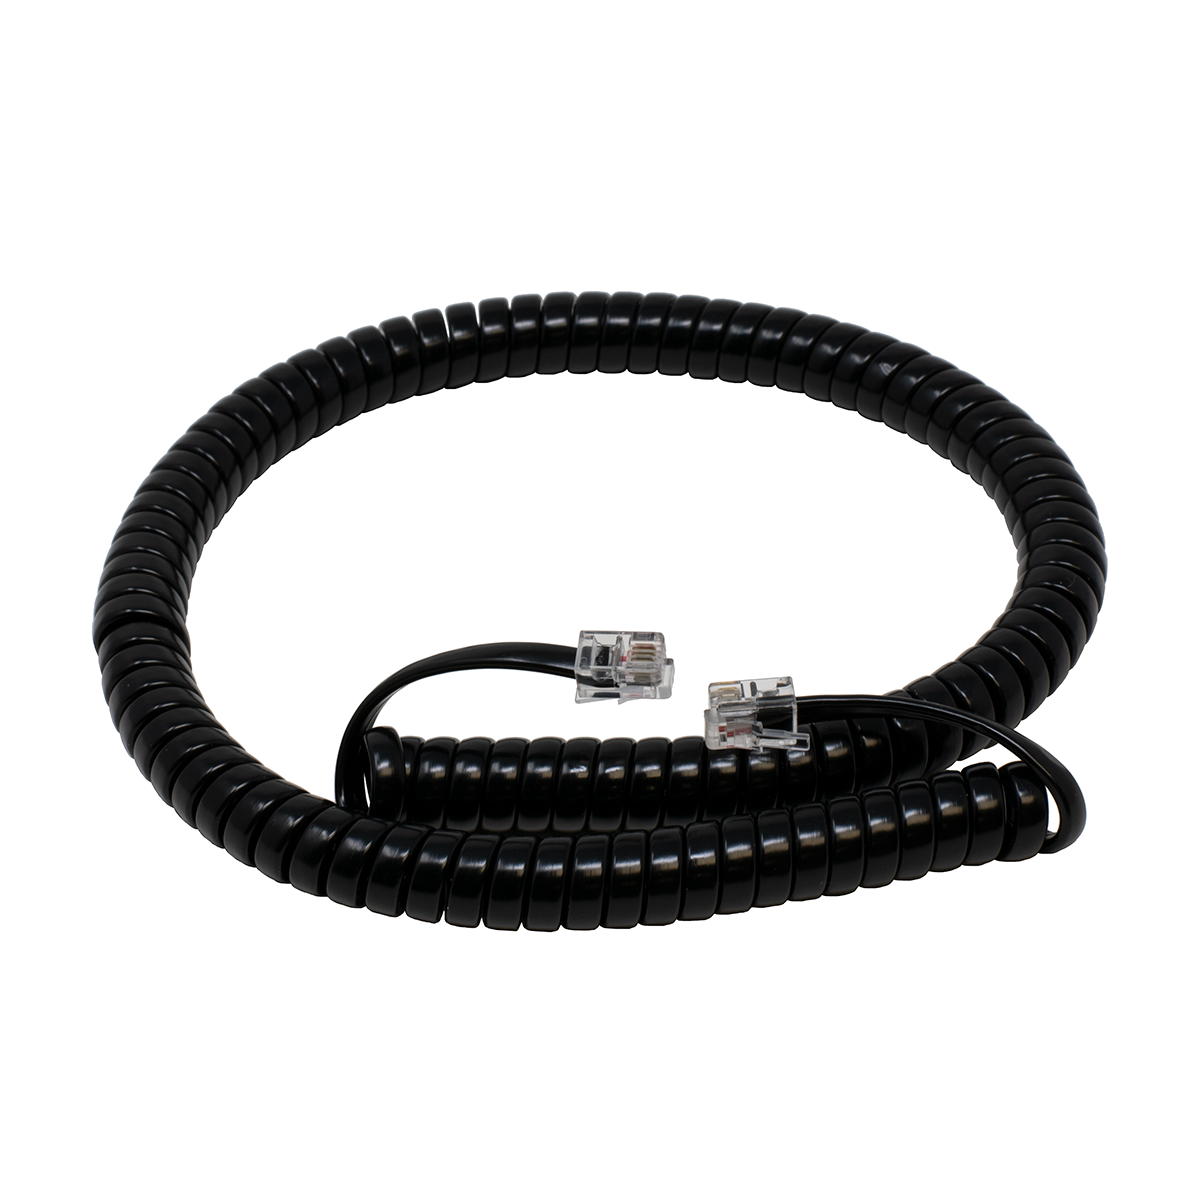 12' Black Coiled Handset Cord